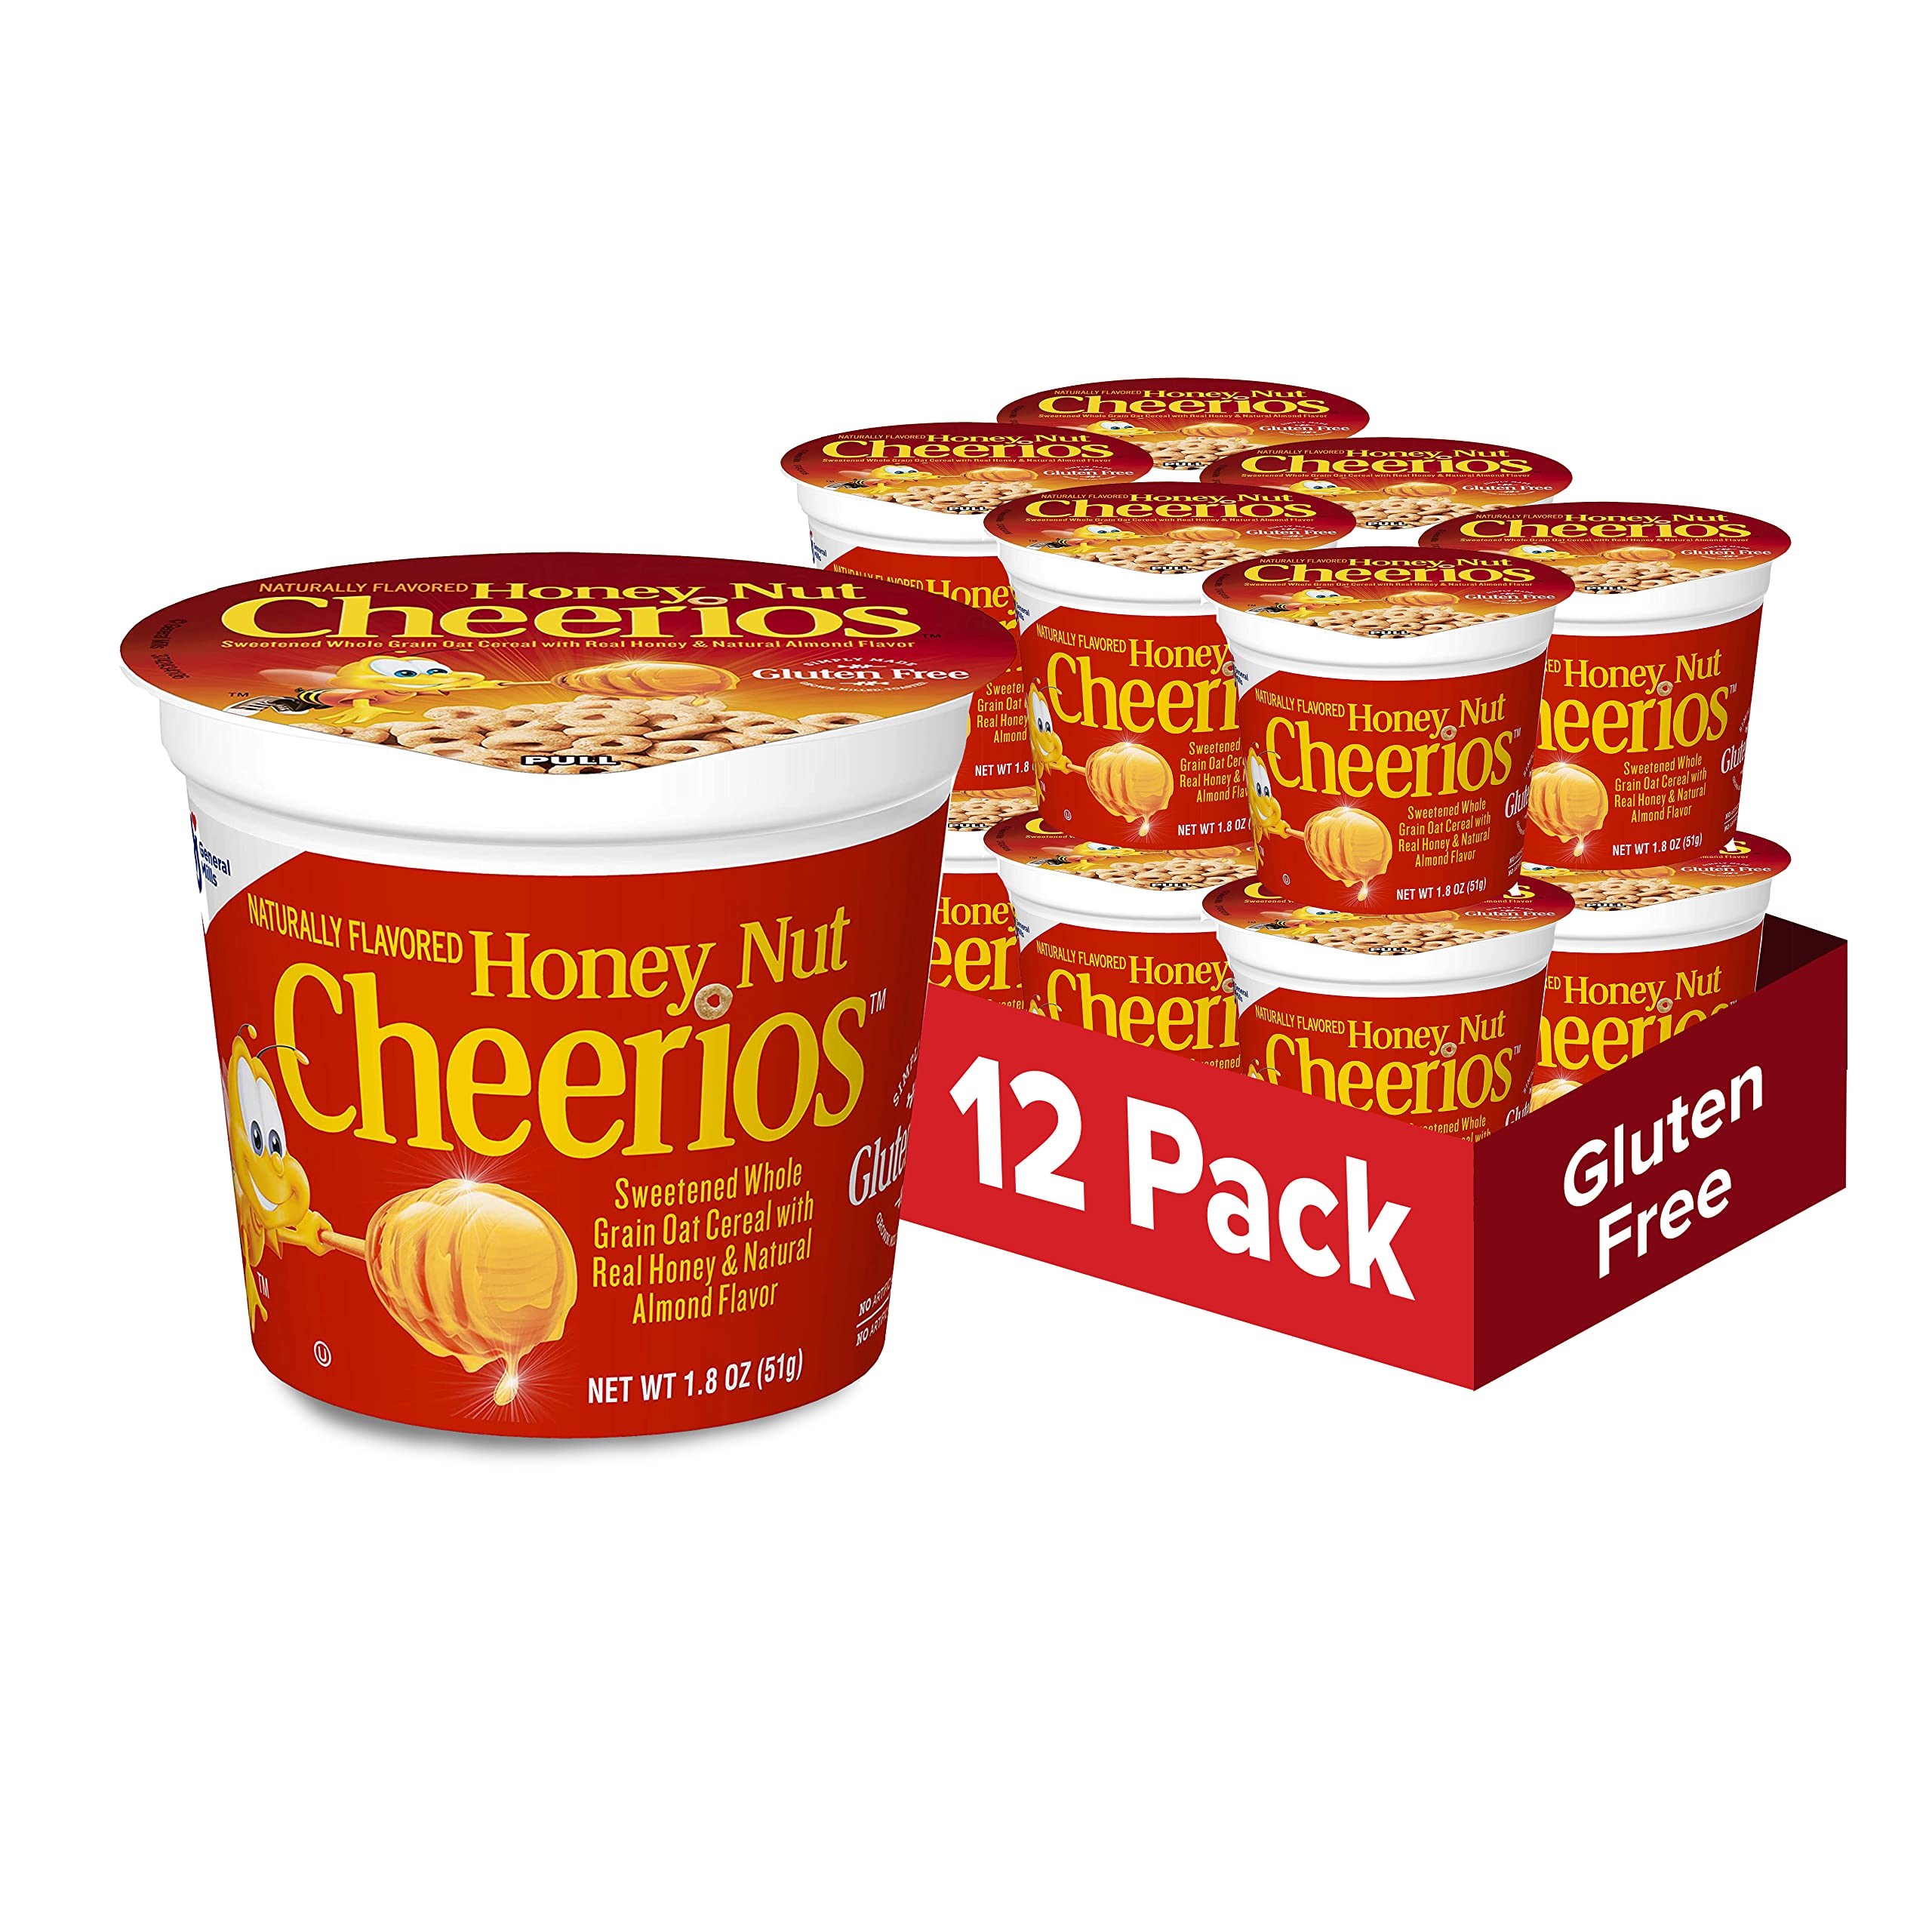 Honey Nut Cheerios Heart Healthy Cereal in a Cup, Gluten Free Cereal with  Whole Grain Oats, Single Serve Cereal Cups, 1.8 oz (Pack of 12) Honey Nut  Cheerios 1.8 Ounce (Pack of 12)